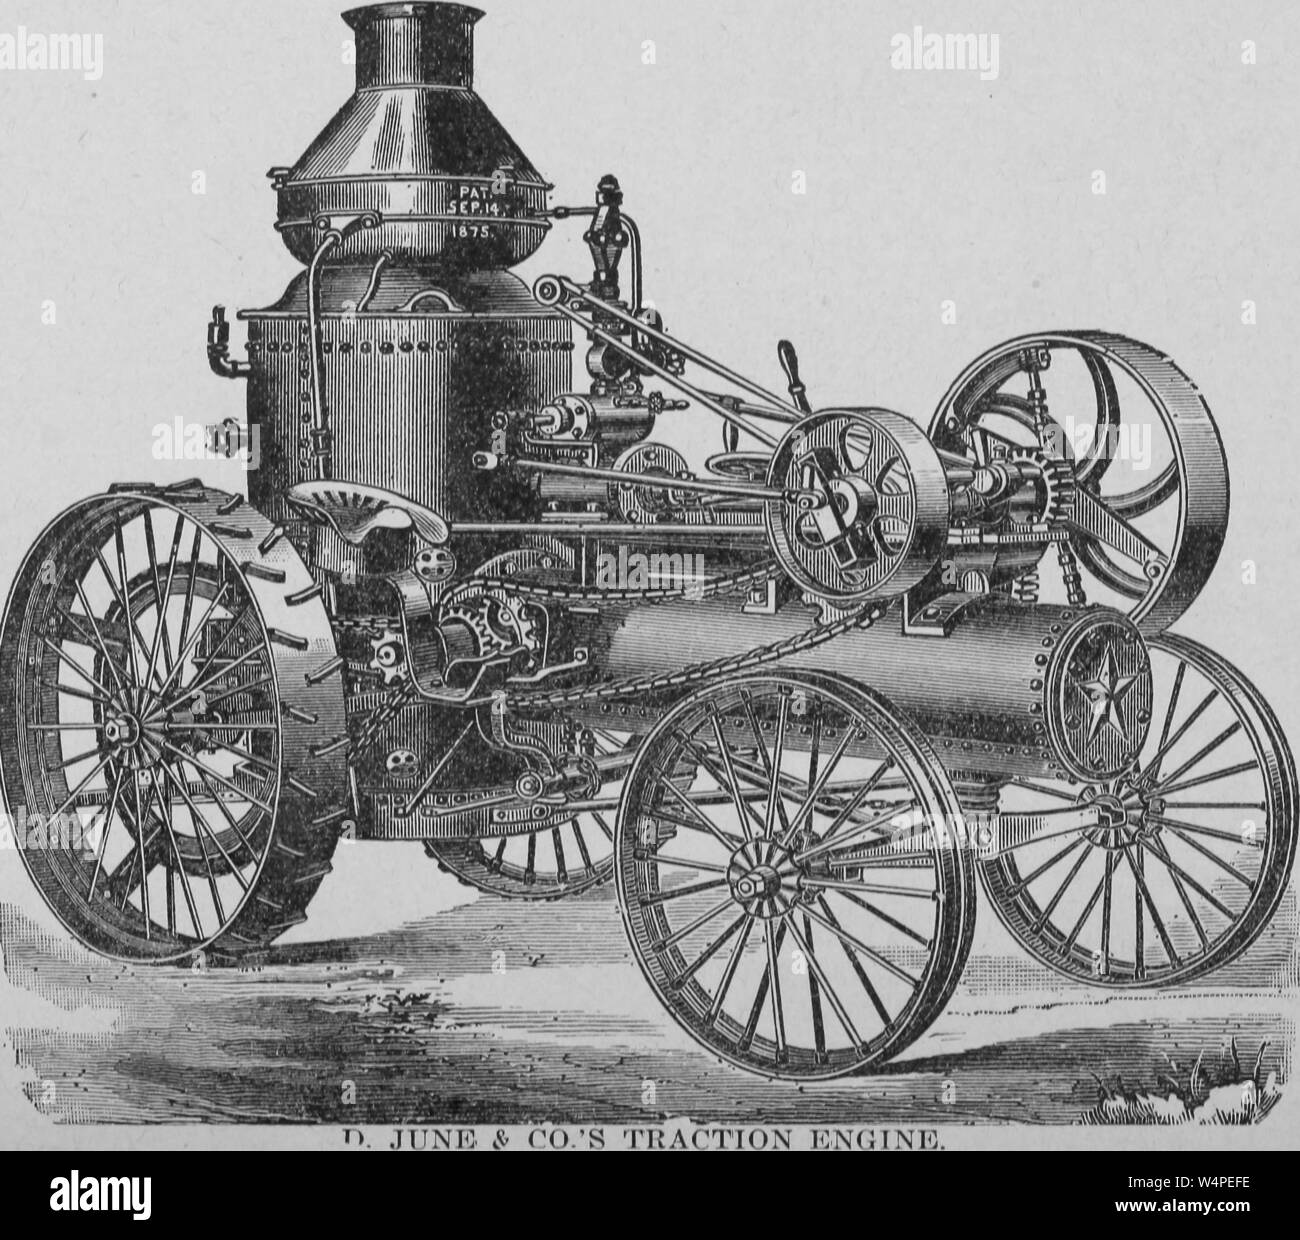 Engraving of the D. June and Co.'s steam traction engine, from the book 'Farm engines and how to run them' by James H. Stephenson, 1910. Courtesy Internet Archive. () Stock Photo